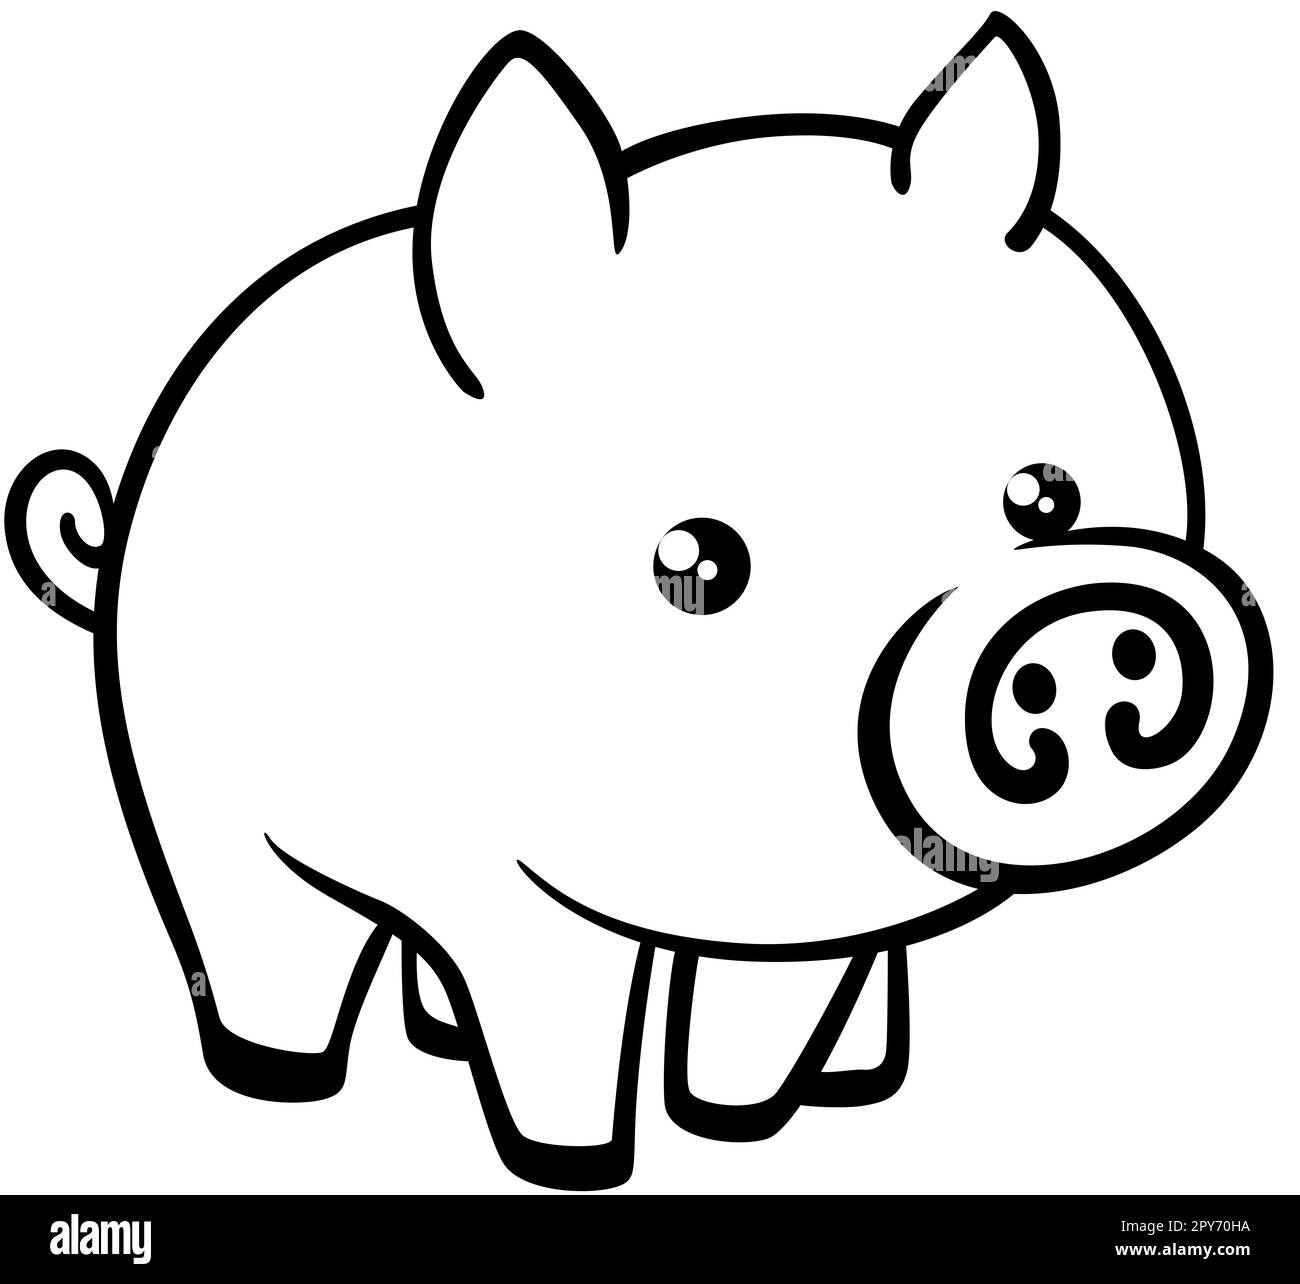 Black isolated outline icon of pig Stock Photo